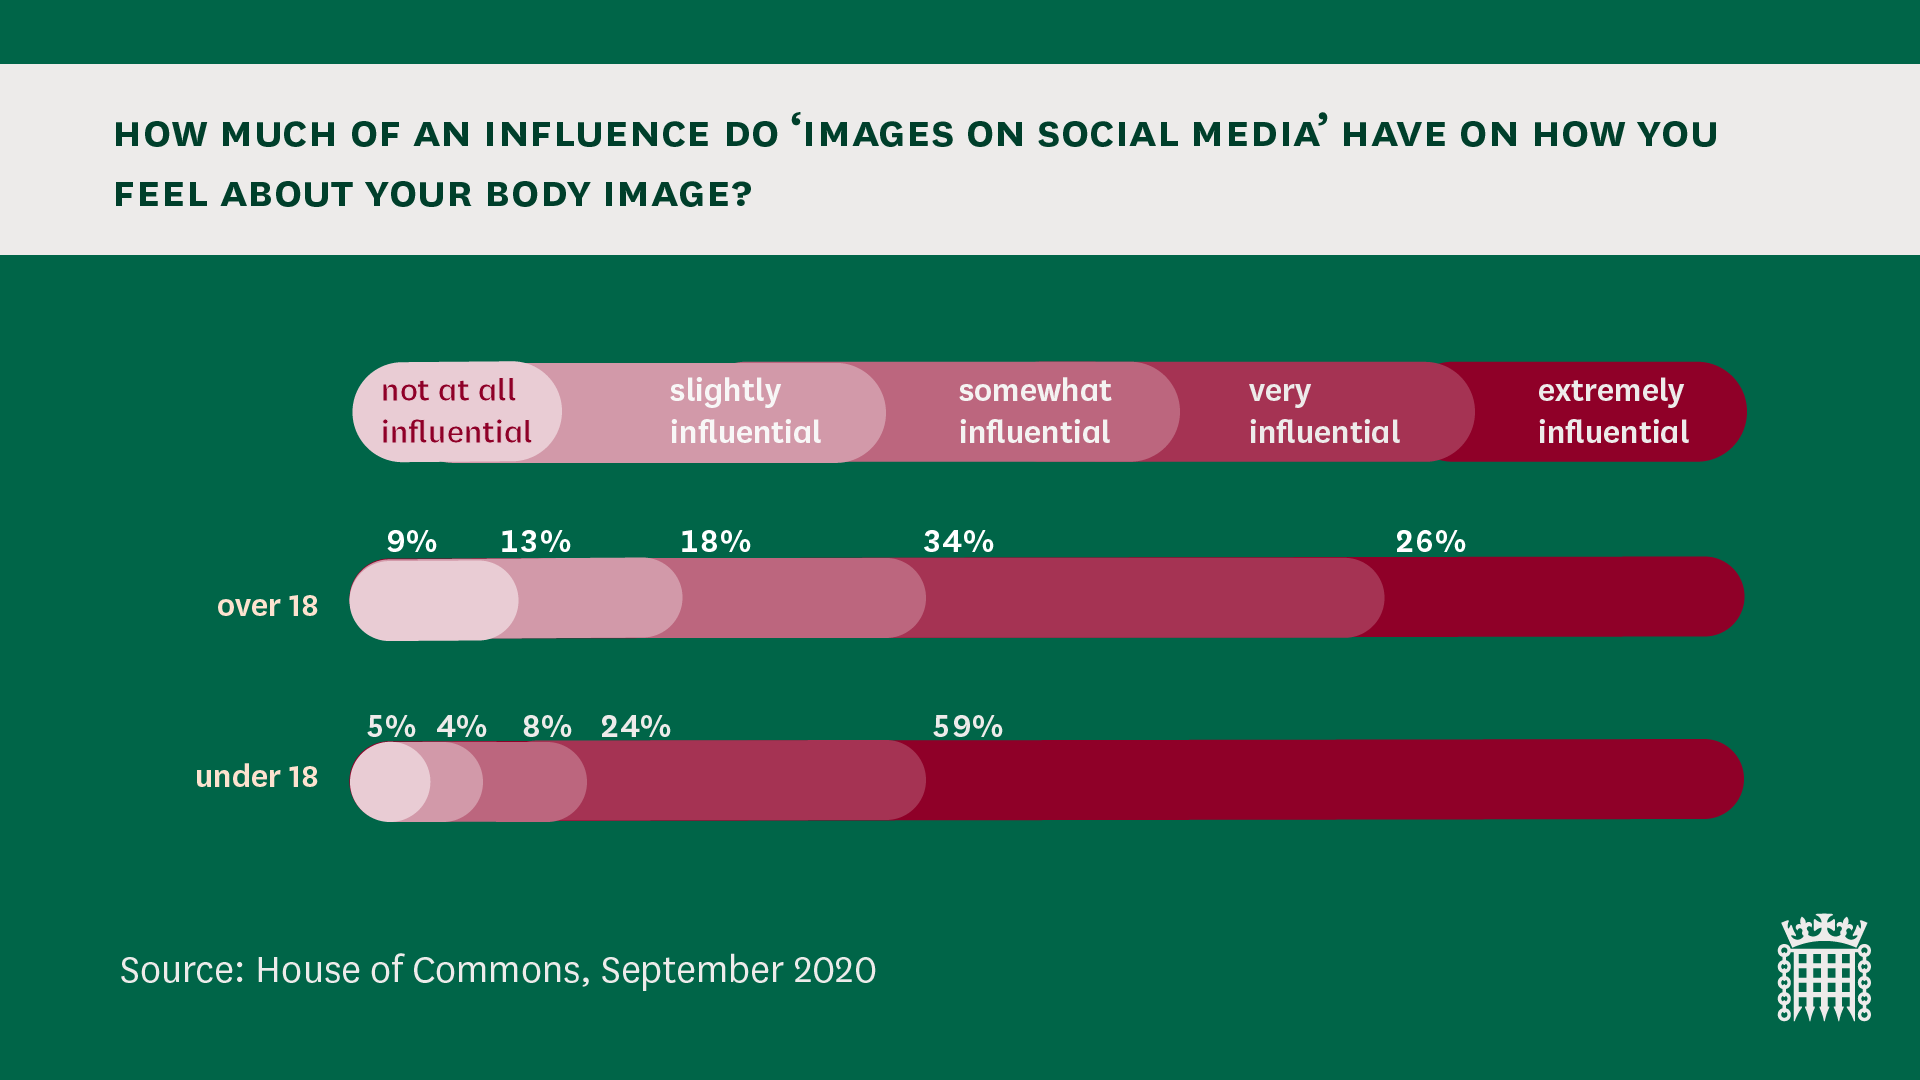 Graph showing how images on social media make those surveyed feel about their body image: Over 18 - 9% not at all influential, 13% slightly influential, 18% somewhat influential, 34% very influential, 26% extremely influential. Under 18 - 5% not at all influential, 4% slightly influential, 8% somewhat influential, 24% very influential, 59% extremely influential